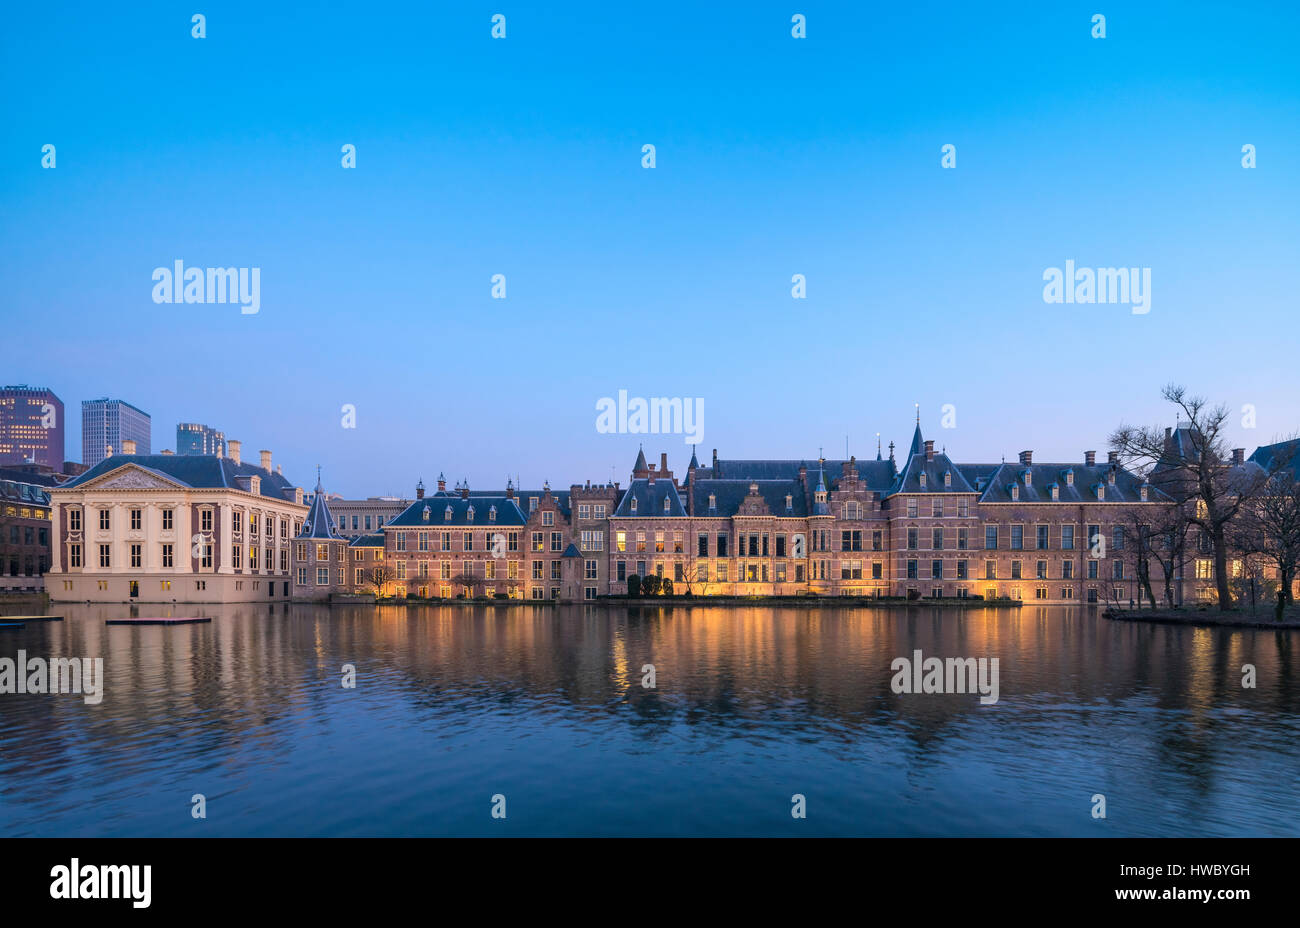 The Hague Netherlands Parliament buildings and the Mauritshuis Museum. Stock Photo